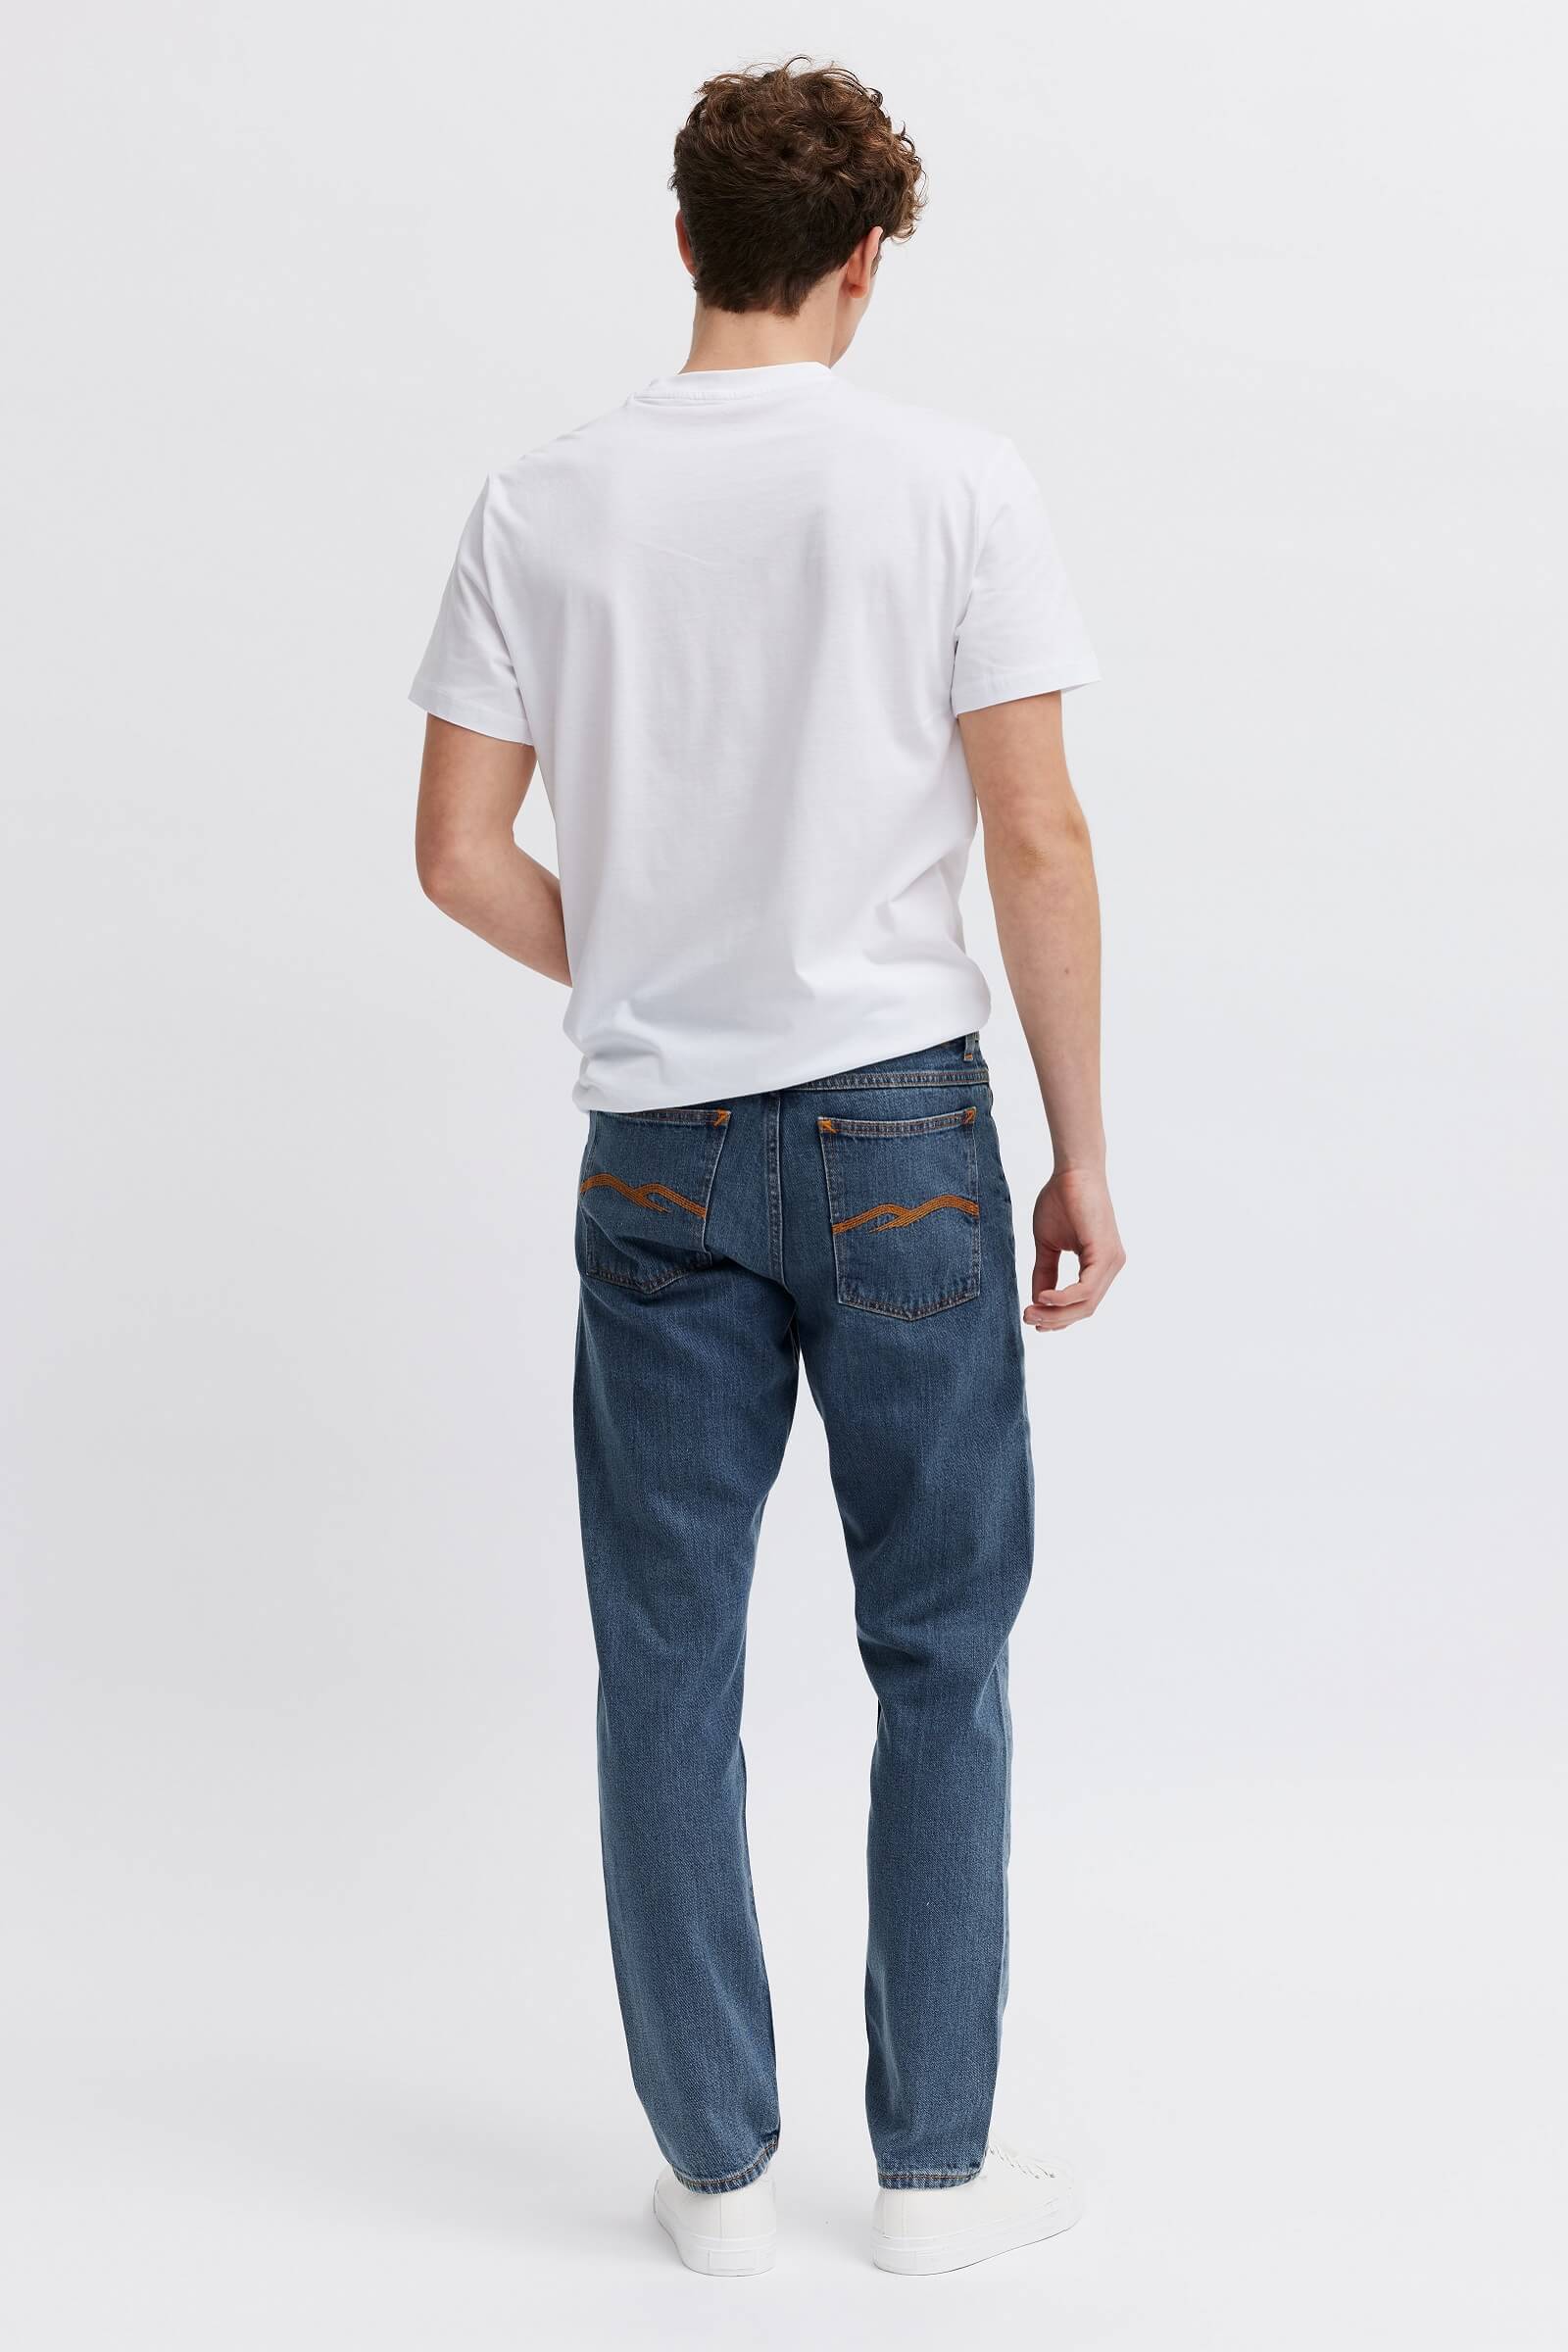 Loose style and relaxed fit, ethical jeans for men